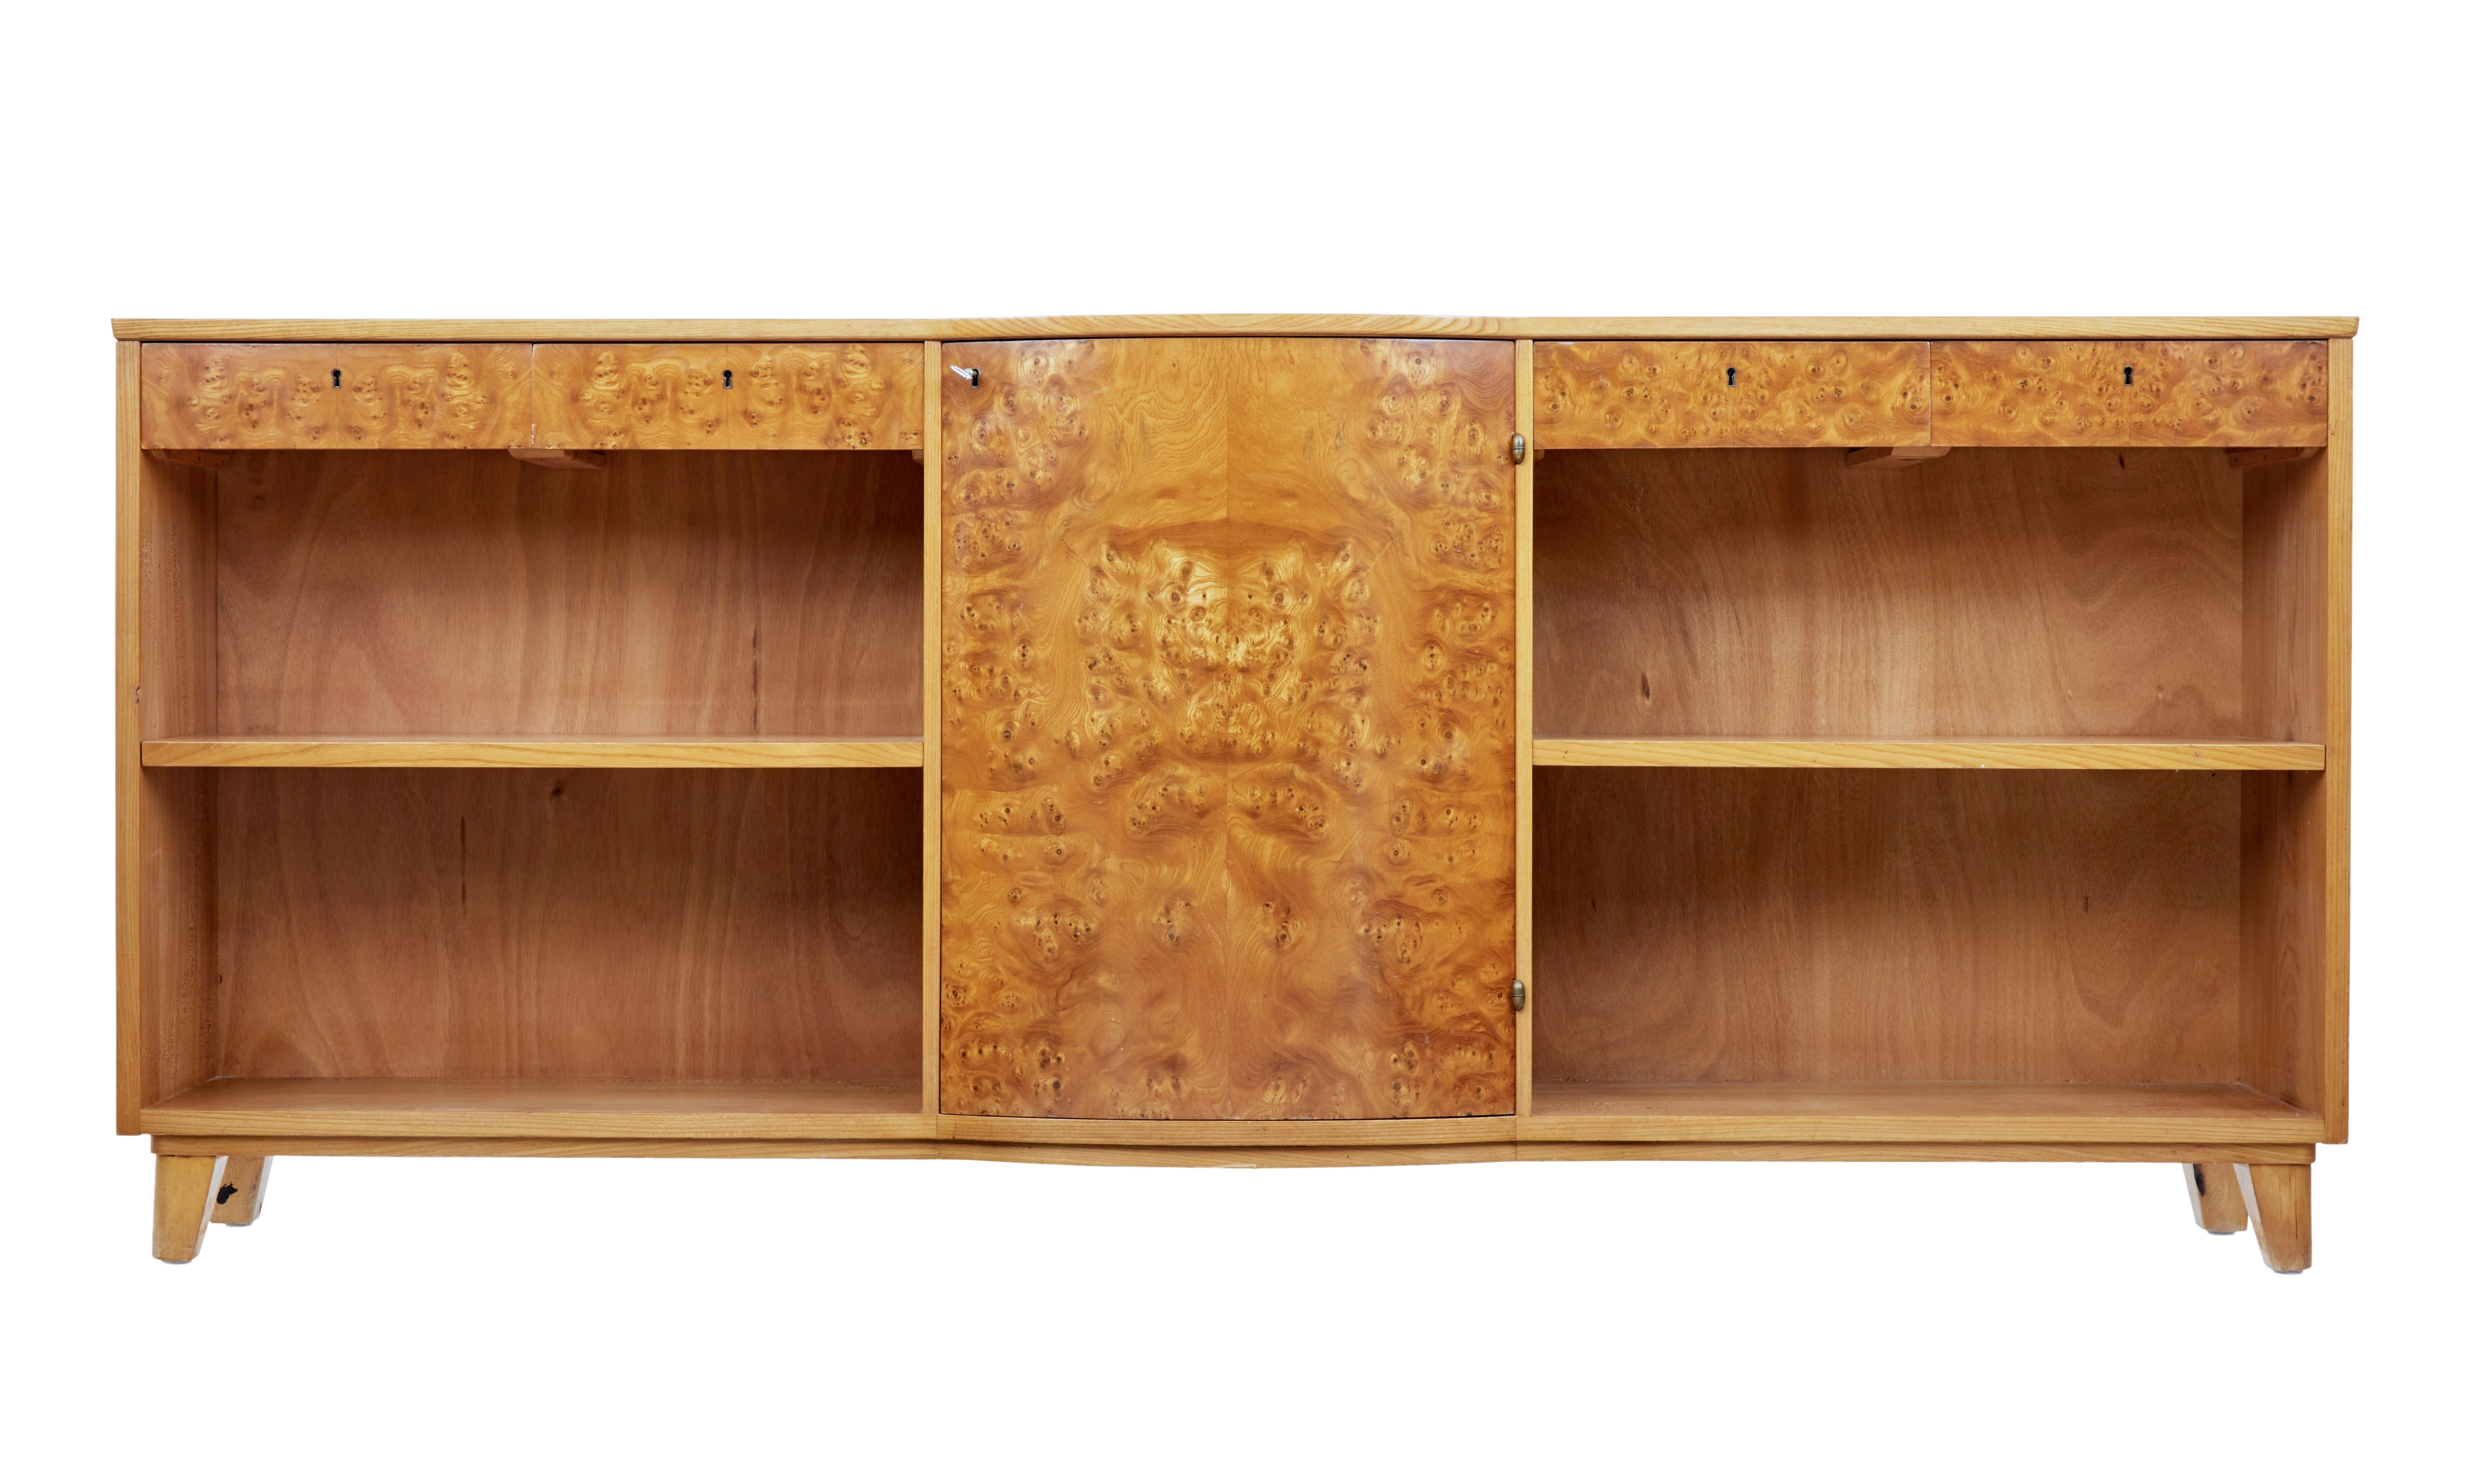 Large and impressive Scandinavian low bookcase, circa 1950.

Bowfront burr veneer central door which contains 2 shelves. Flanked either side with 2 drawers below the top surface and a single shelf for book storage.

Working locks and key.